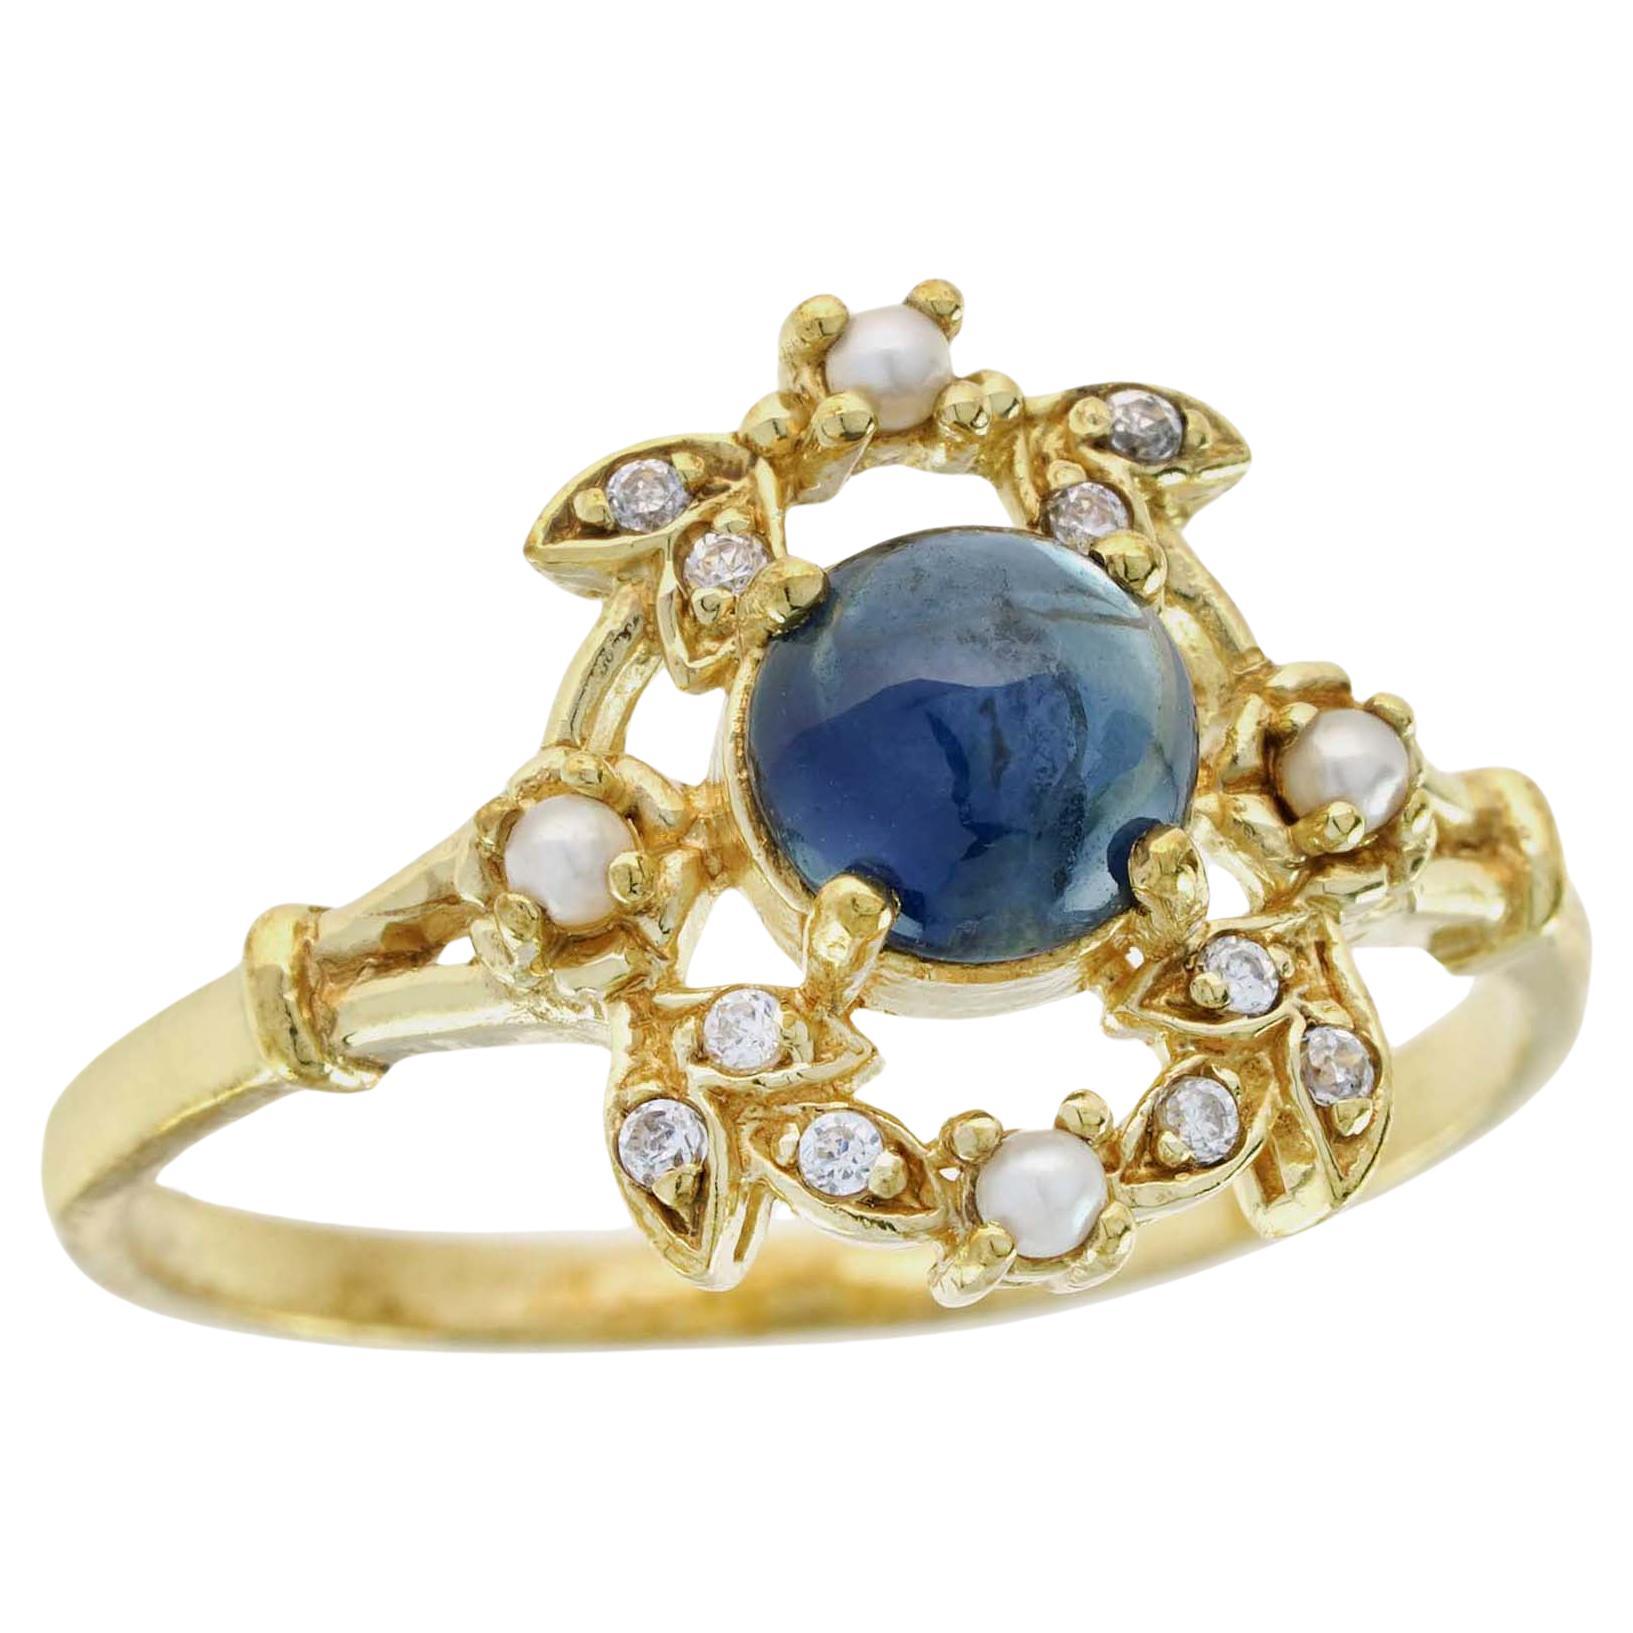 For Sale:  Natural Cabochon Blue Sapphire and Pearl Vintage Style Ring in Solid 9K Gold